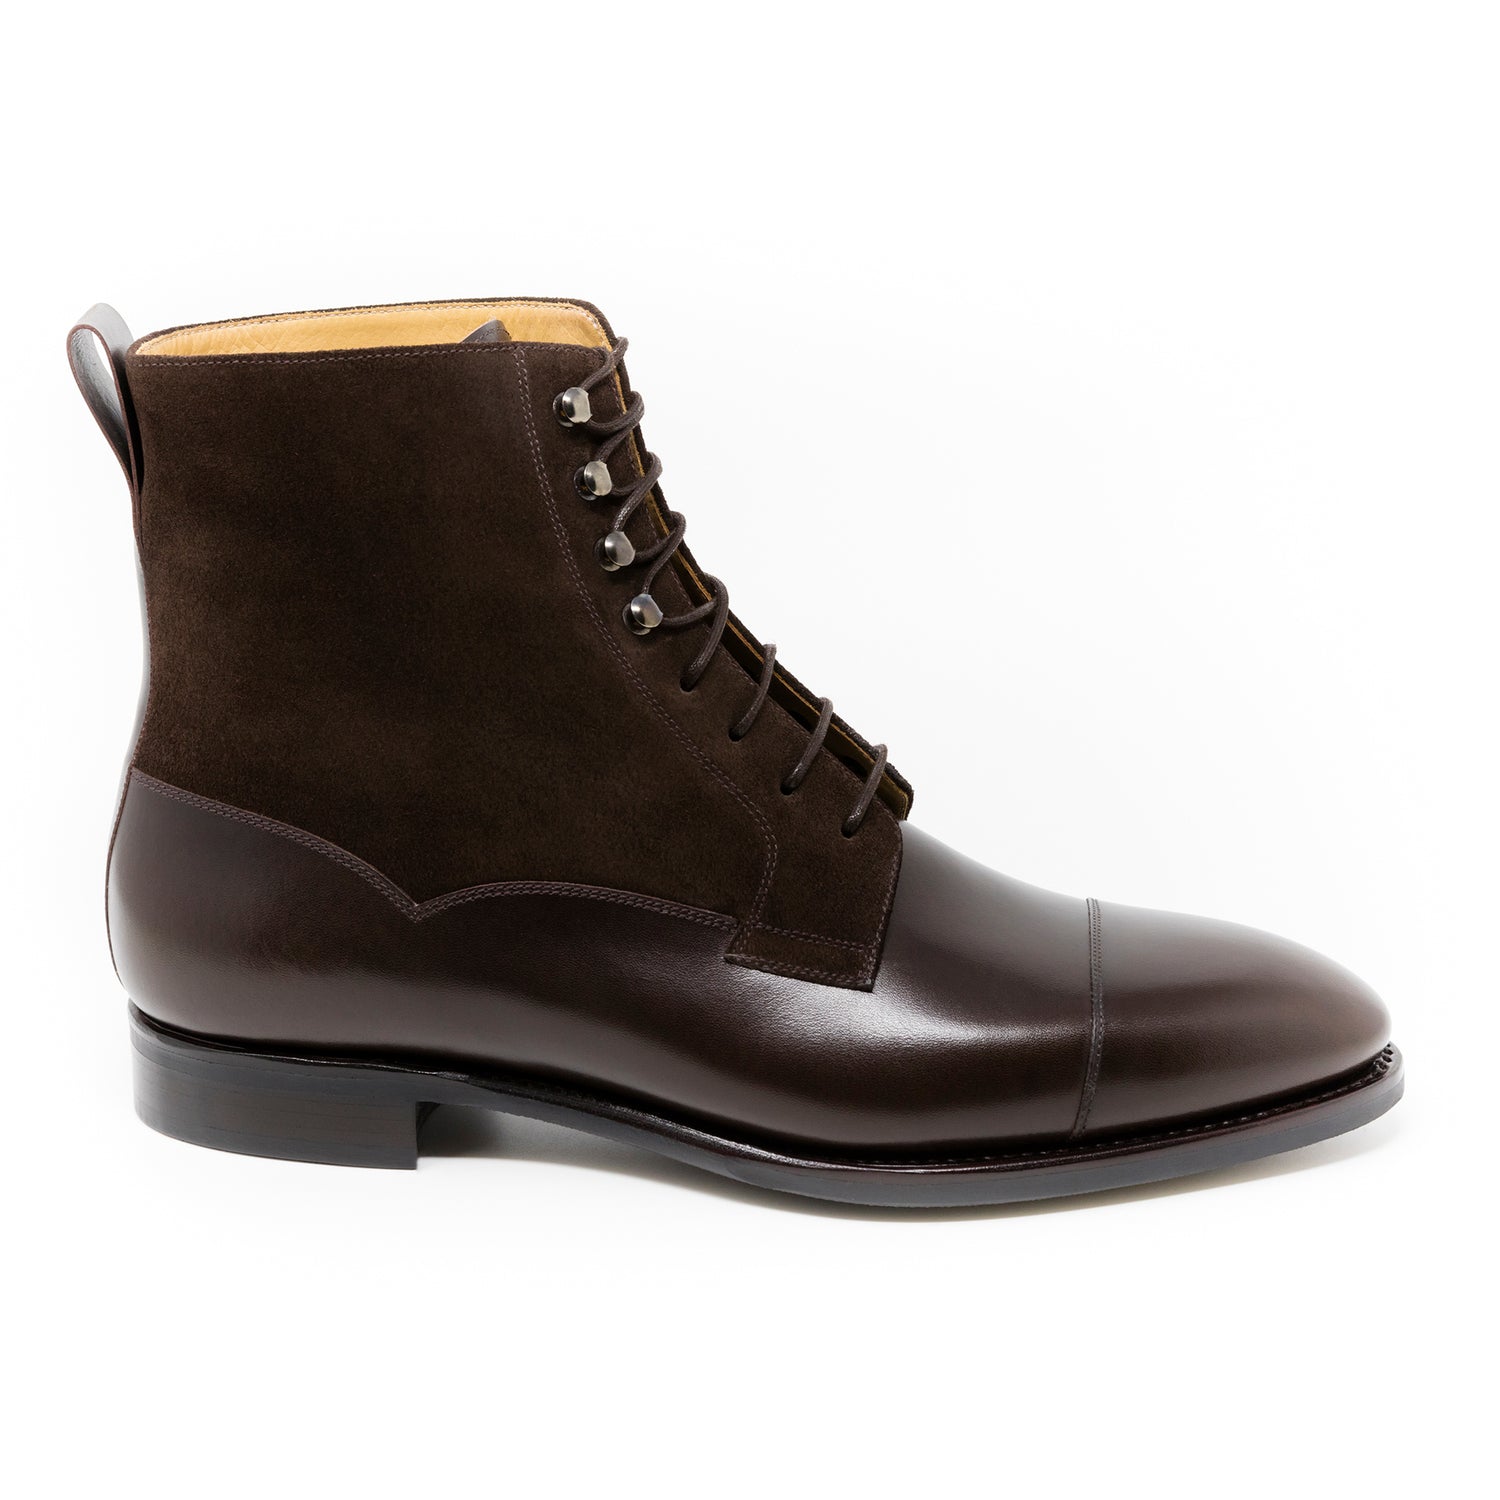 TLB Mallorca leather shoes 140 / GOYA / BOXCALF BROWN & SUEDE BROWN